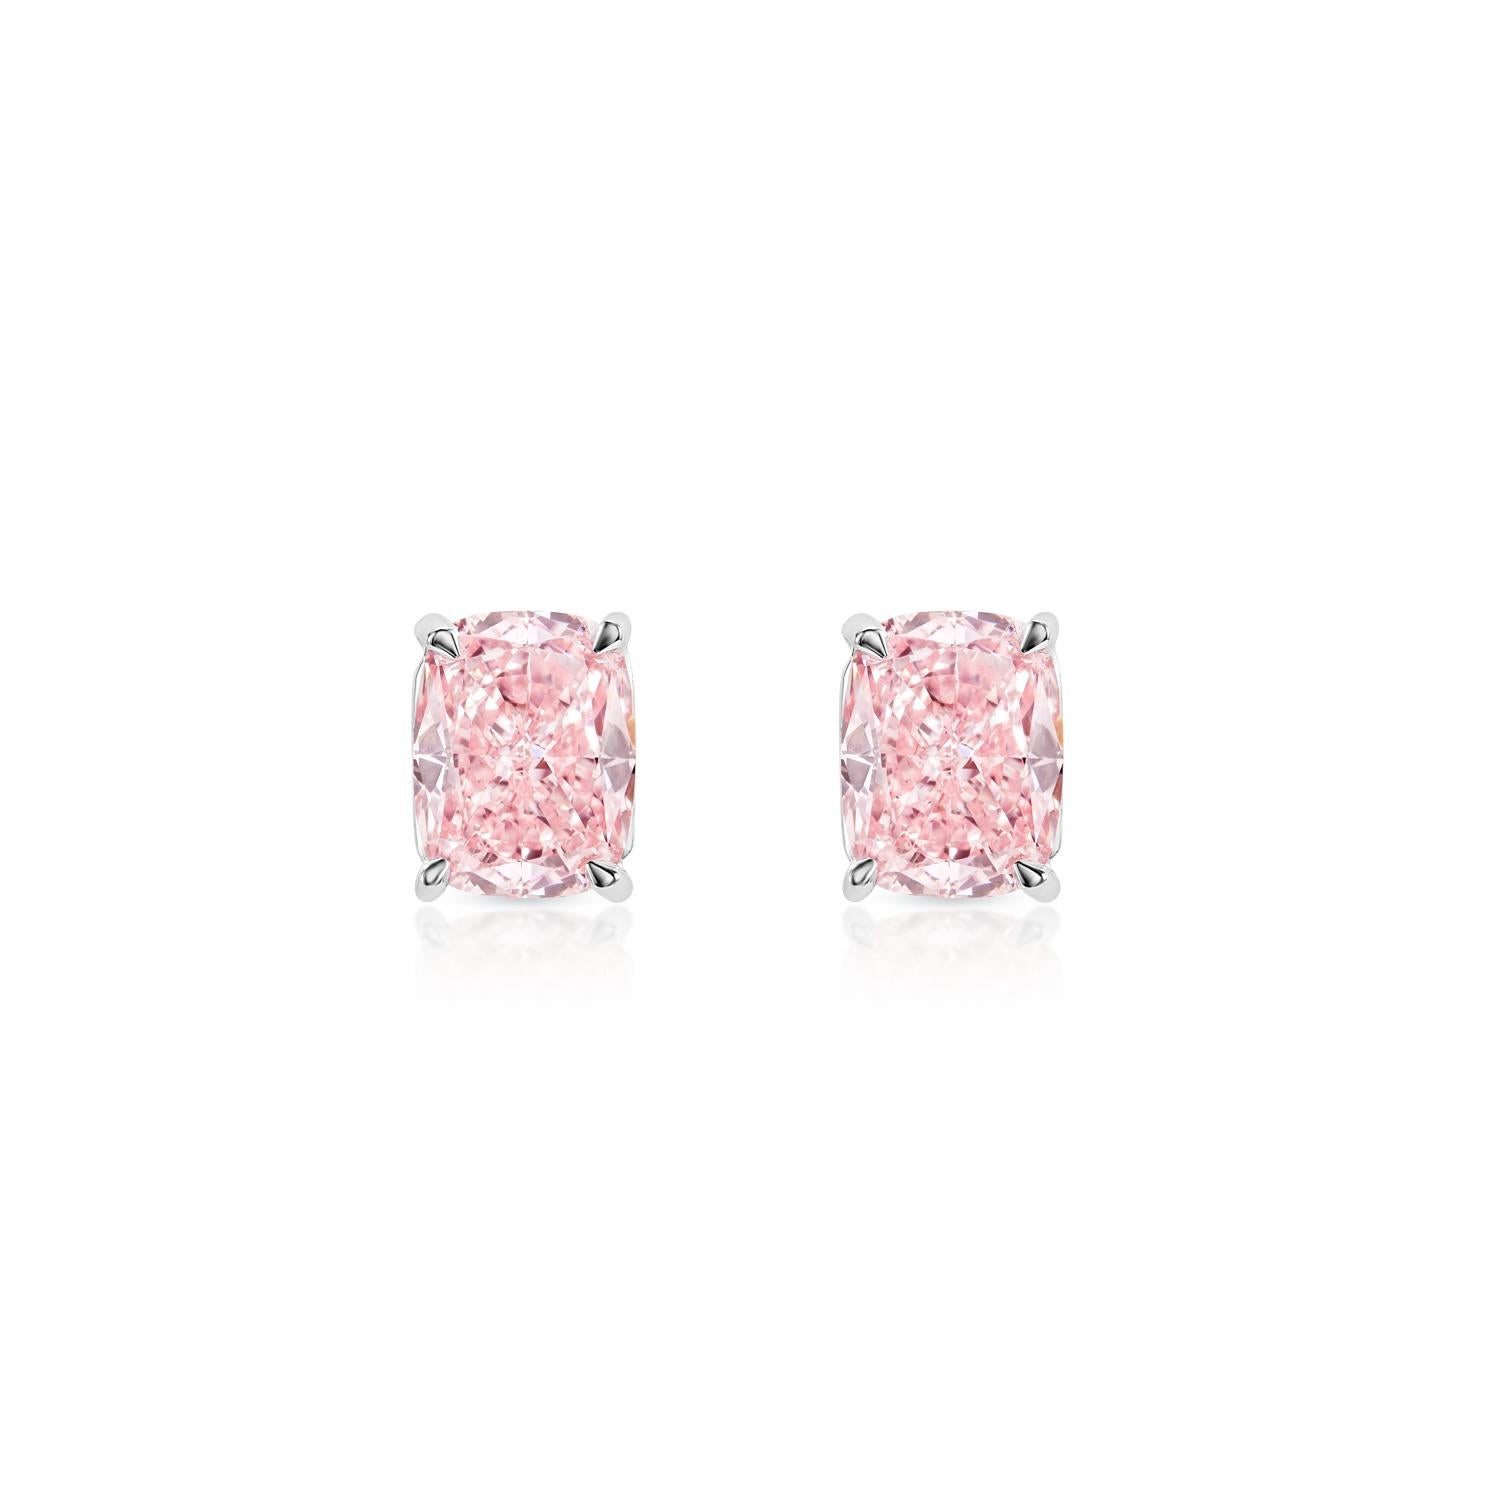 Haisley 5 Carat VVS1 Fancy Vivi Pink Diamond Stud Earrings in 14k White Gold


GIA Certified

Pink Diamond Stud Earrings

Left Stone:

Carat Weight: 2.36 Carats
Color: Fancy Vivid Pink*
Clarity: VVS1
Style: Cushion Cut

Right Stone:

Carat Weight: